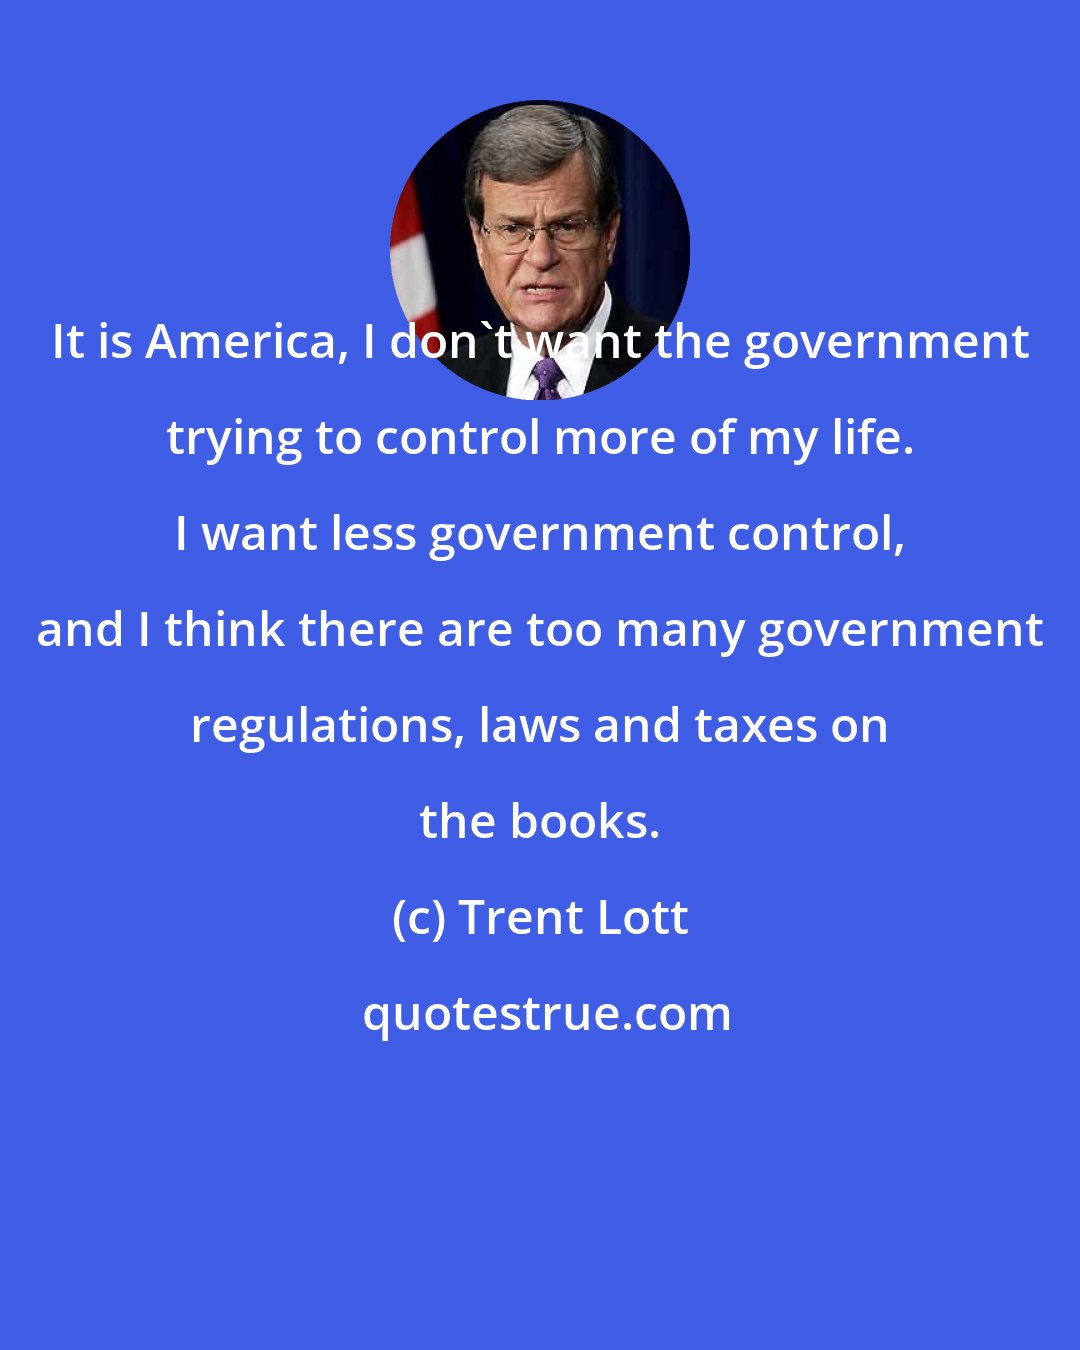 Trent Lott: It is America, I don't want the government trying to control more of my life. I want less government control, and I think there are too many government regulations, laws and taxes on the books.